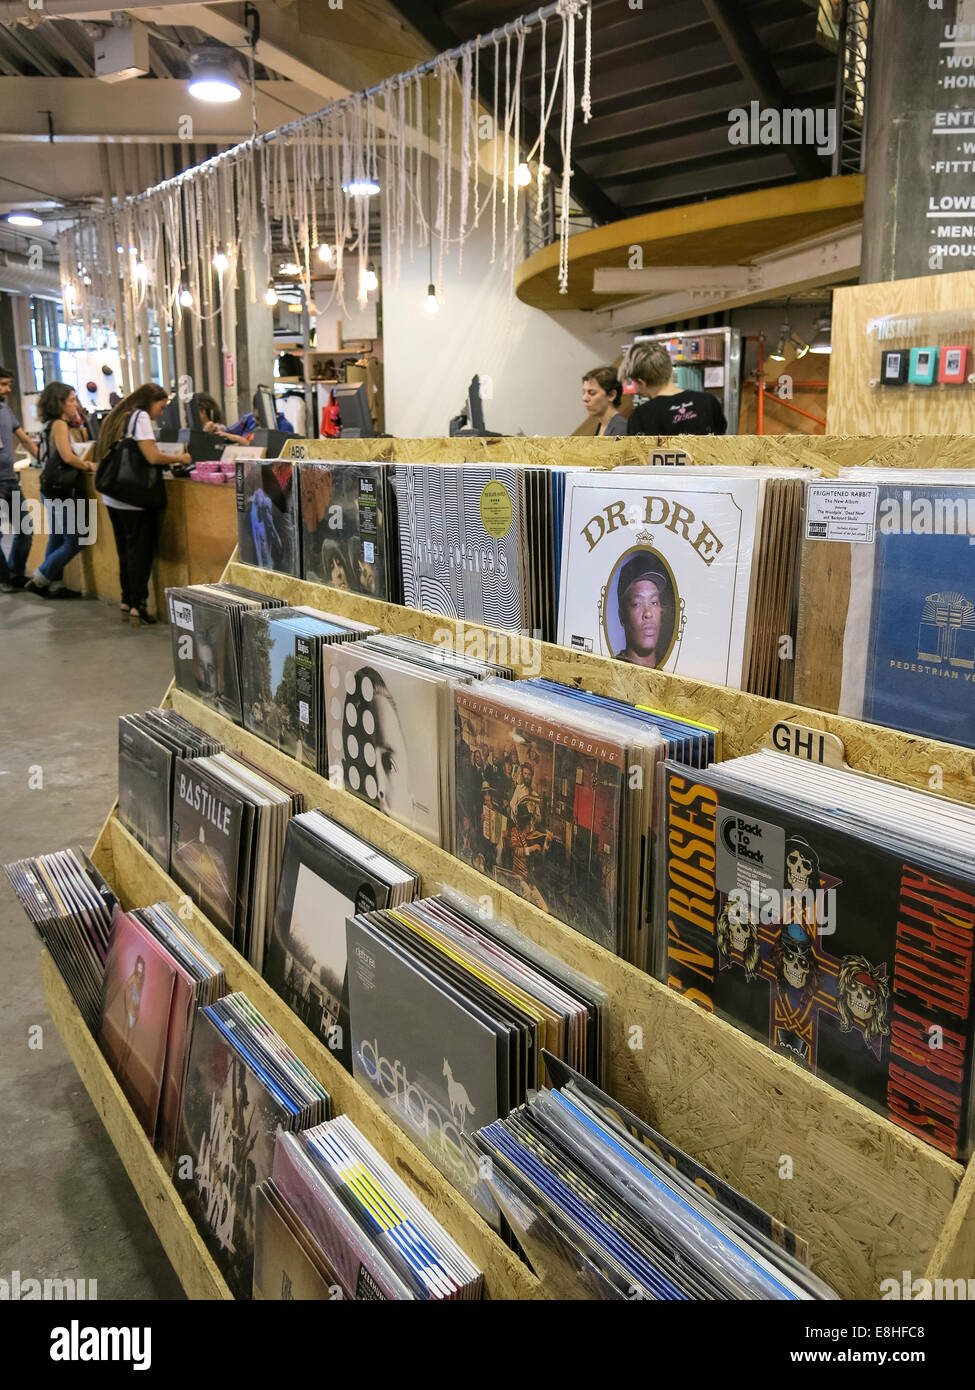 Vinyl Records Display Shelves, Urban Outfitters Store at Herald Square, NYC  Stock Photo - Alamy